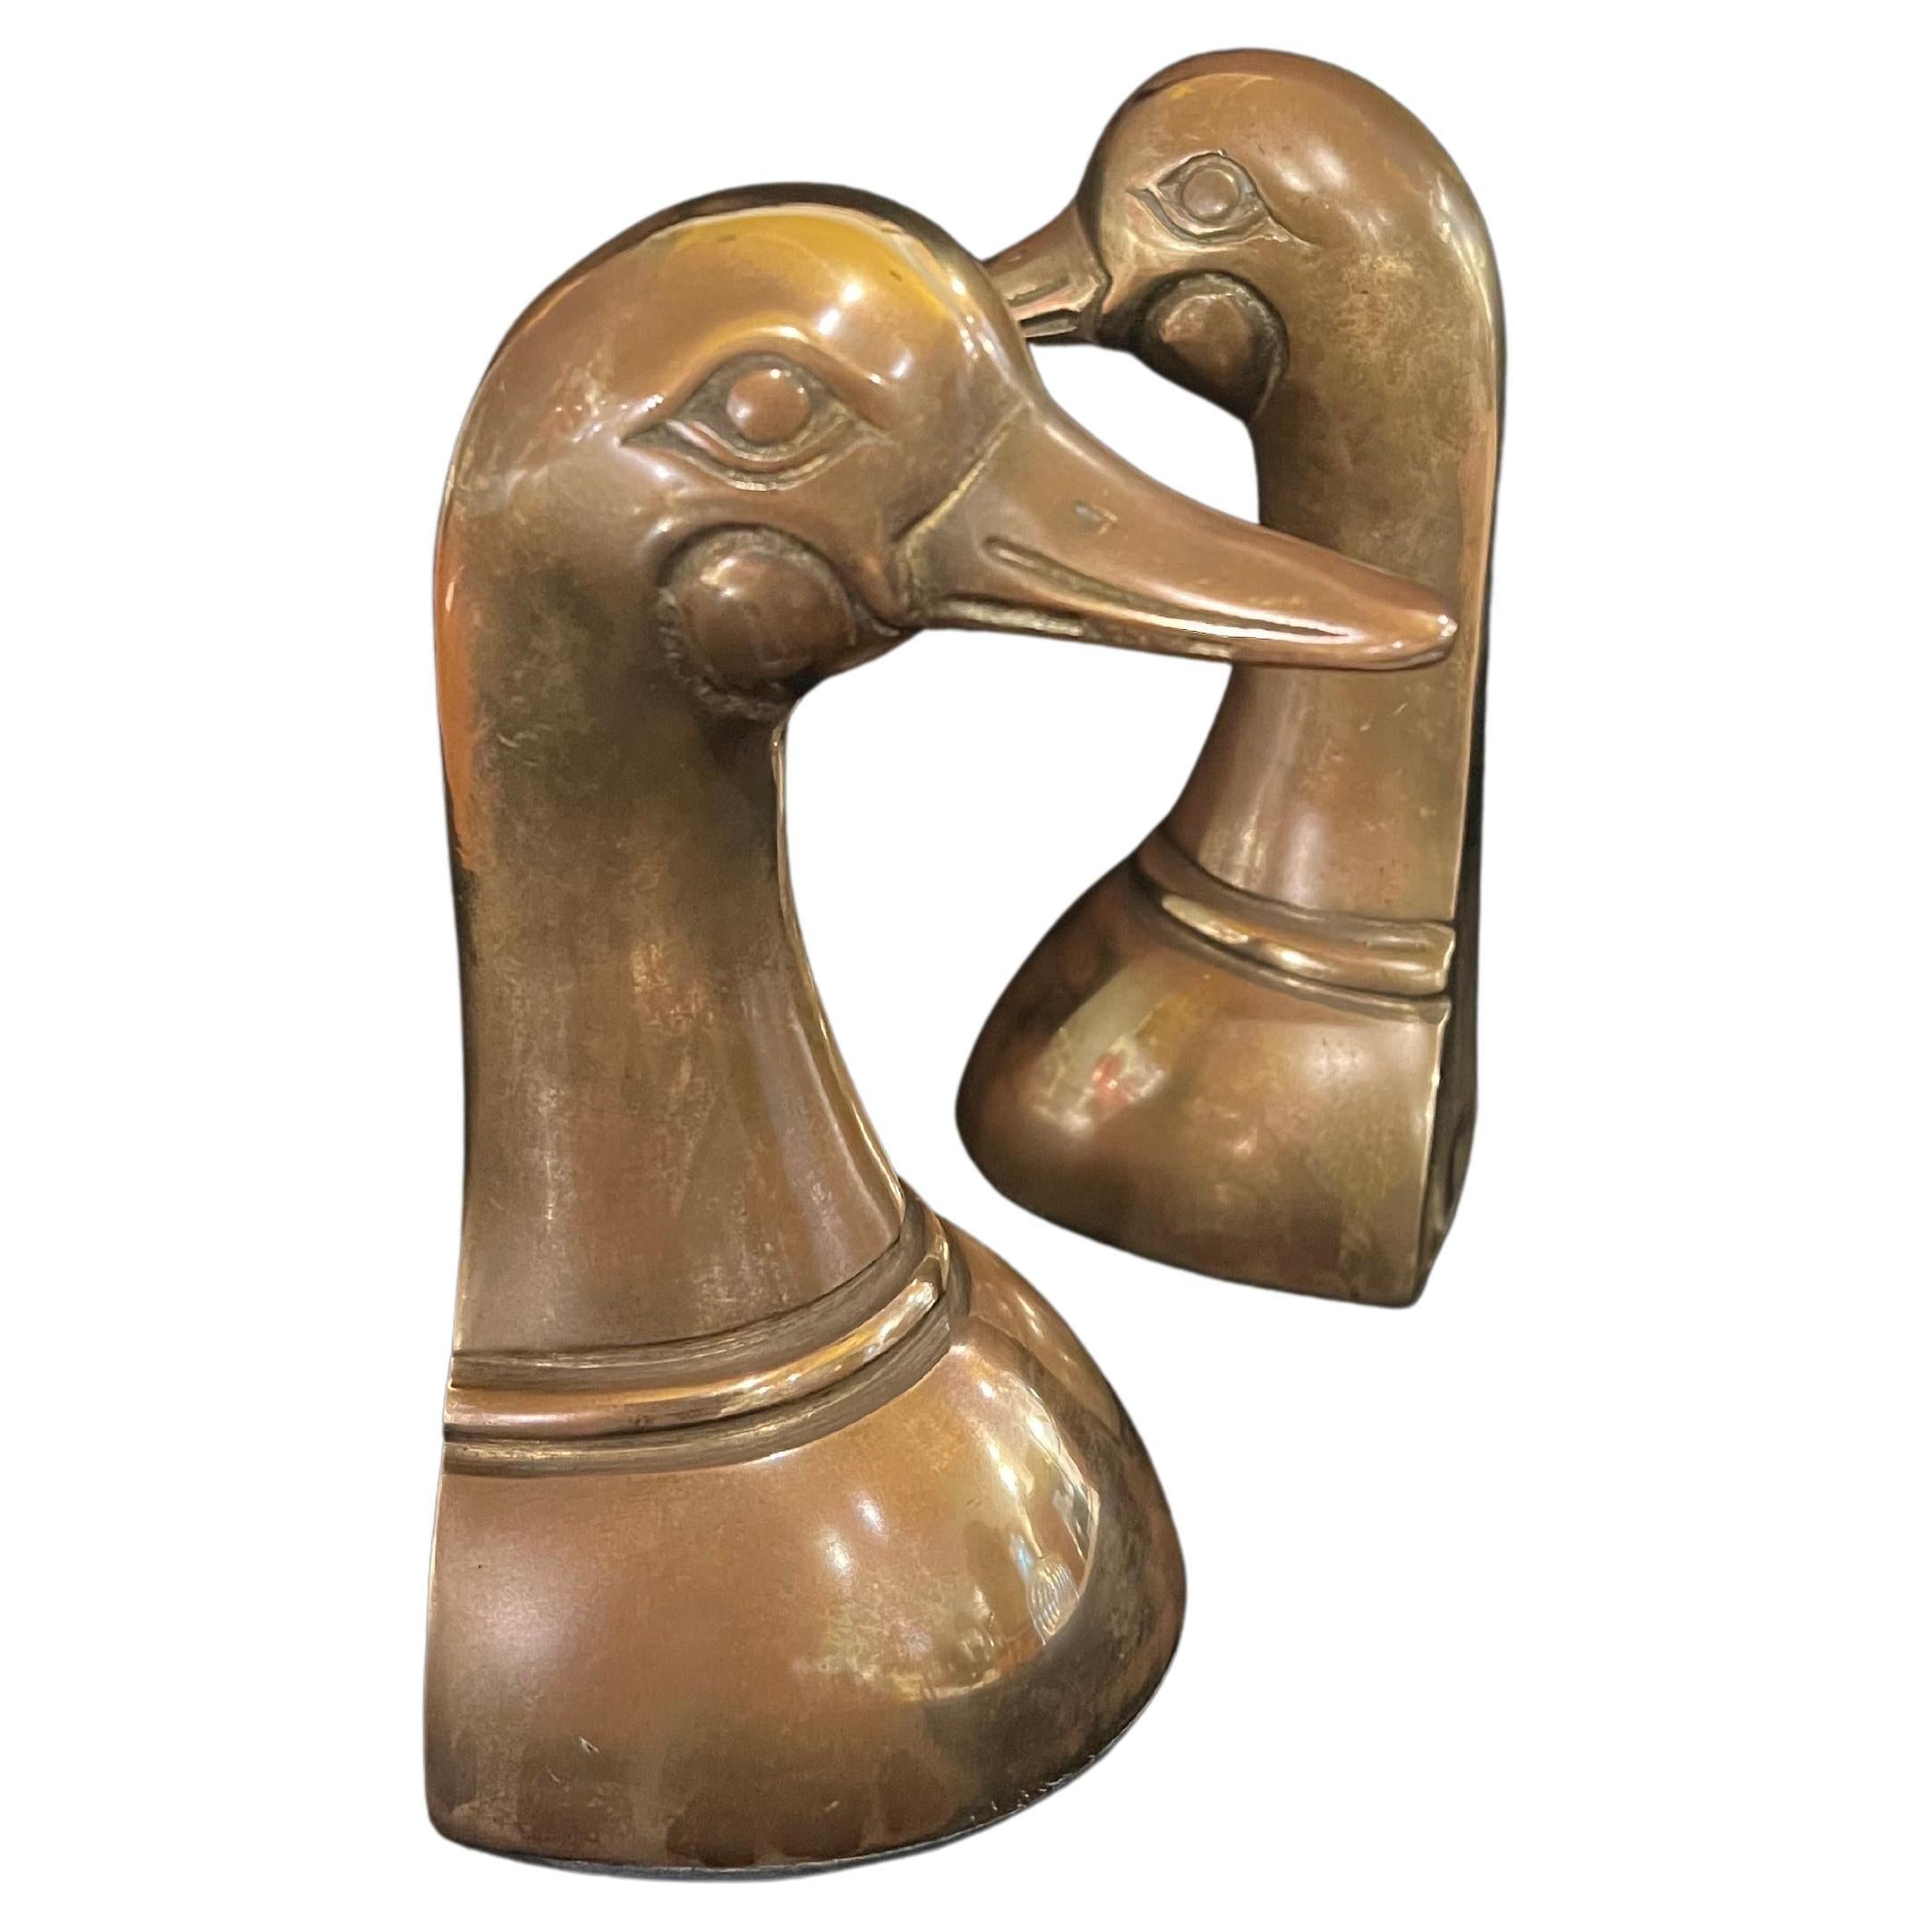 Nicely patinated solid brass bookends, duck heads, circa the 1970s.